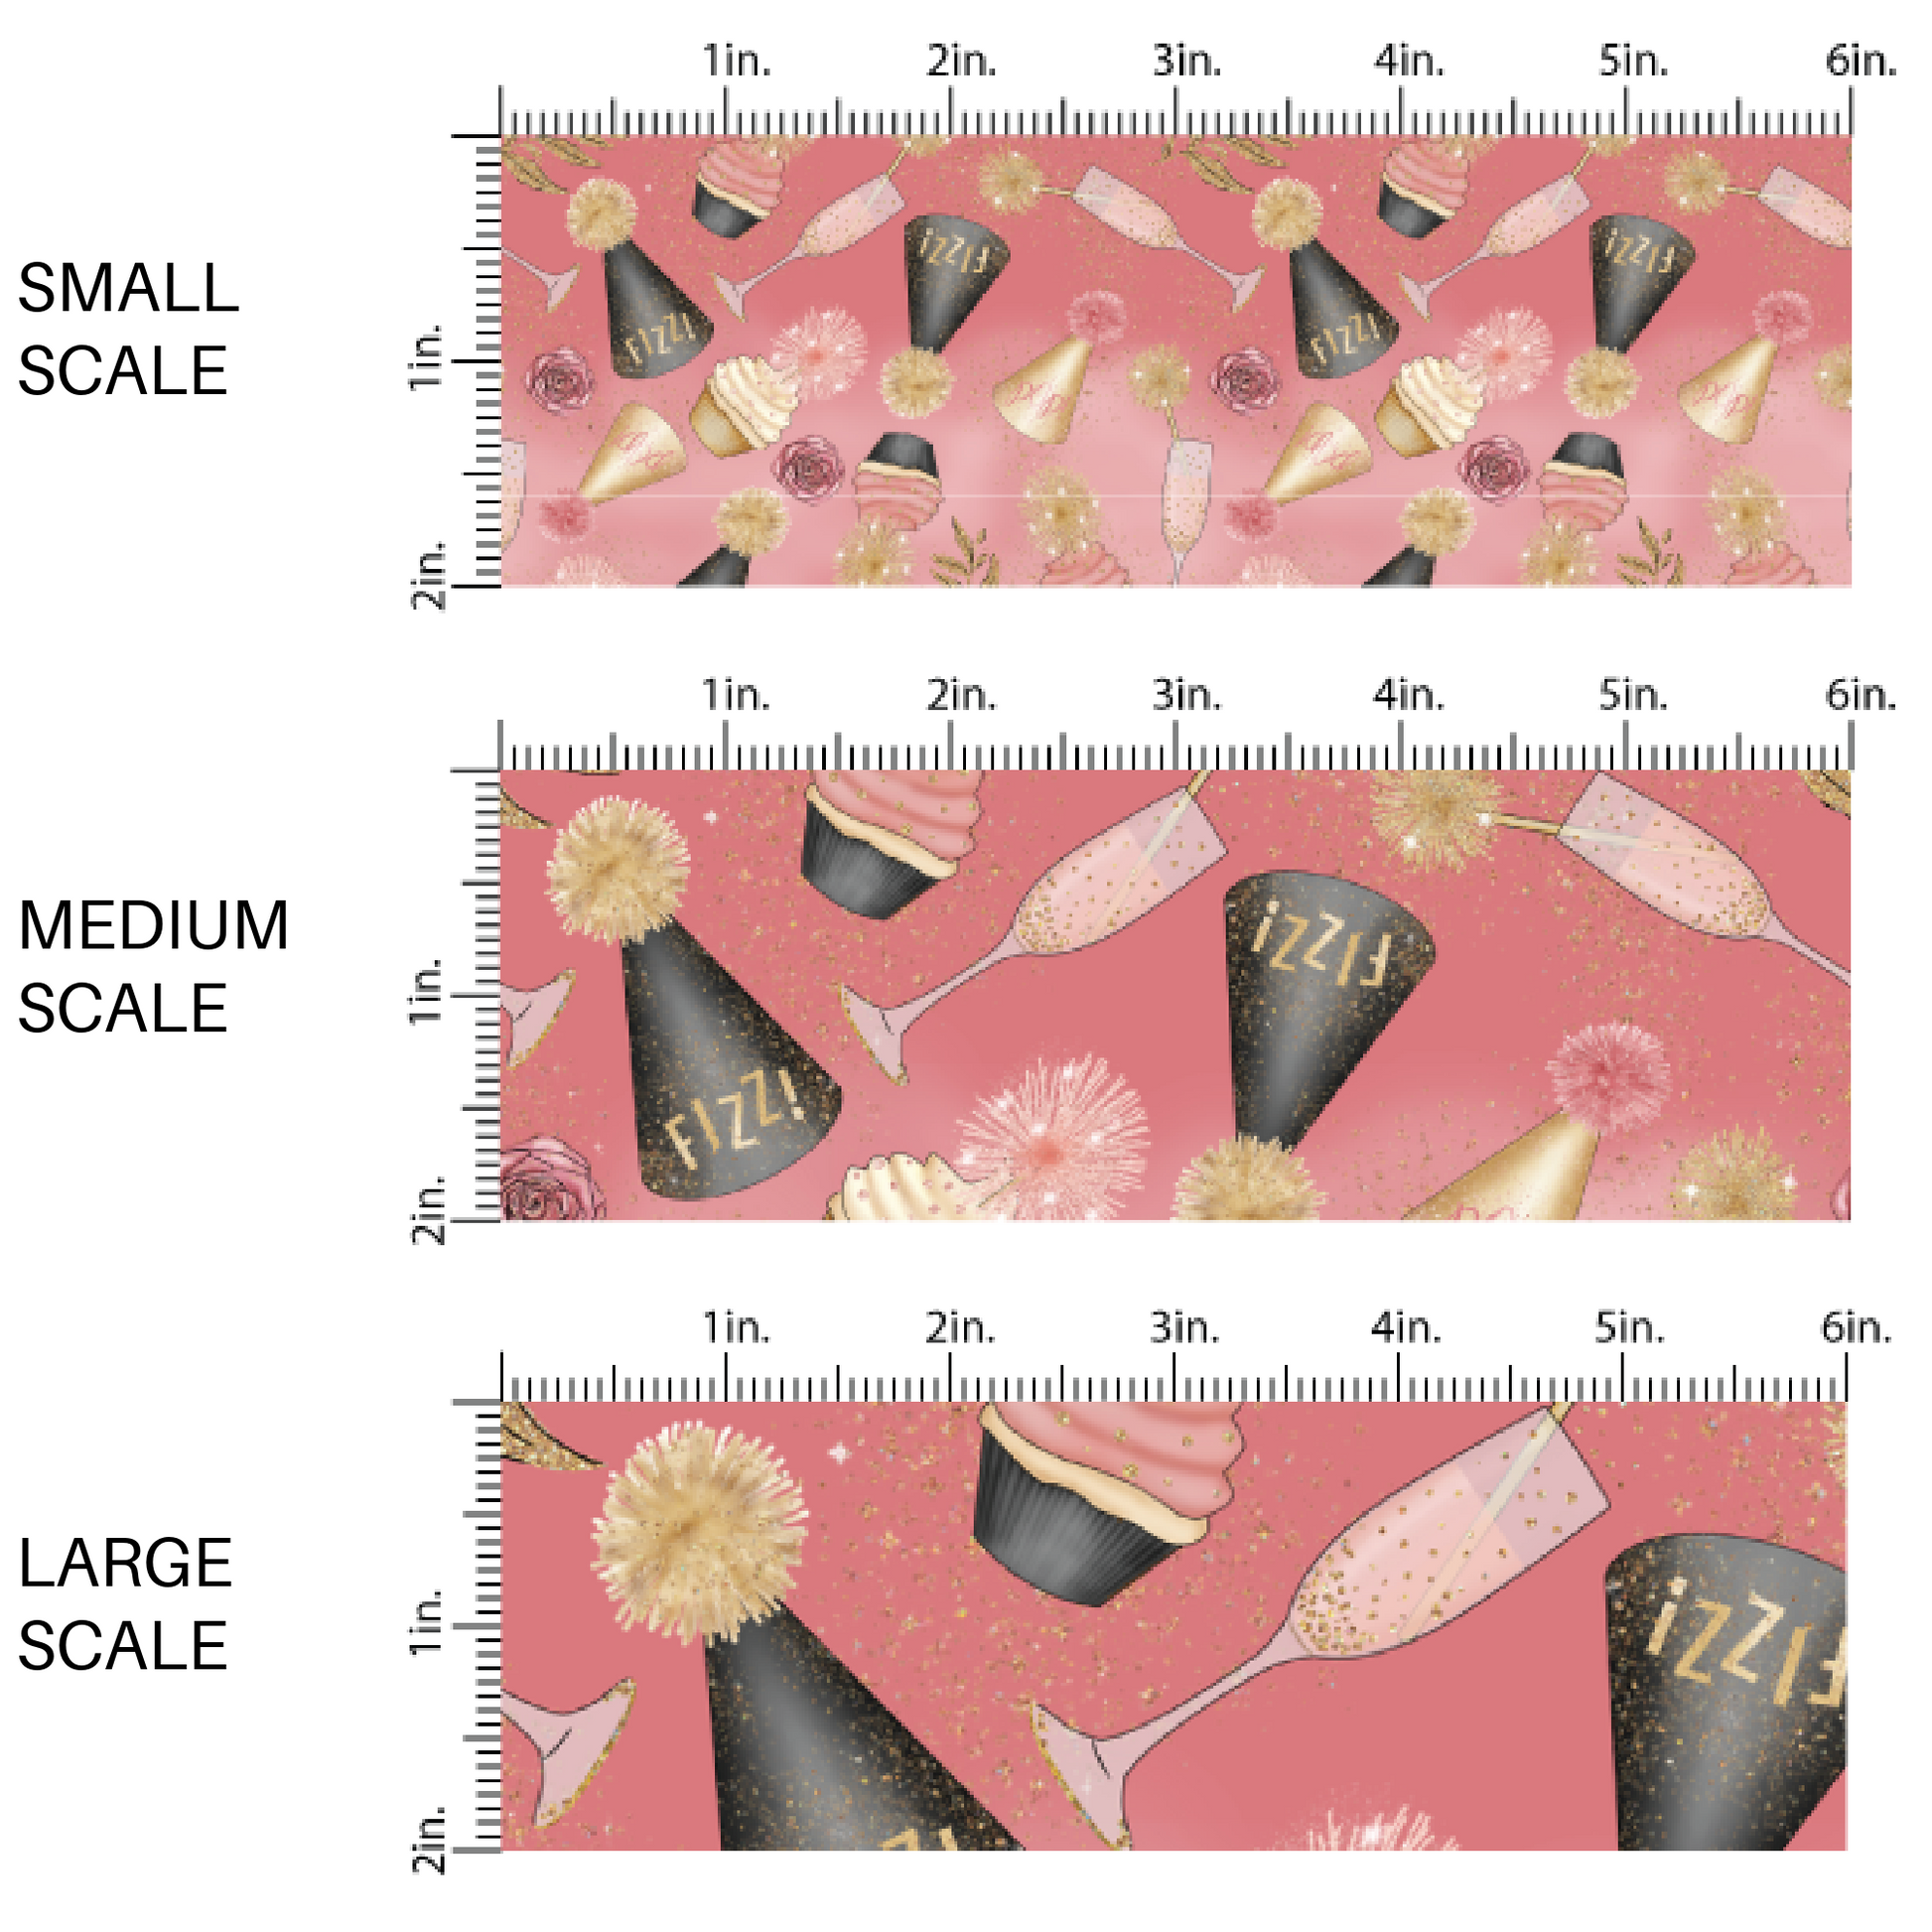 Pink fabric by the yard scaled image guide with cupcakes, party hats, and champagne.